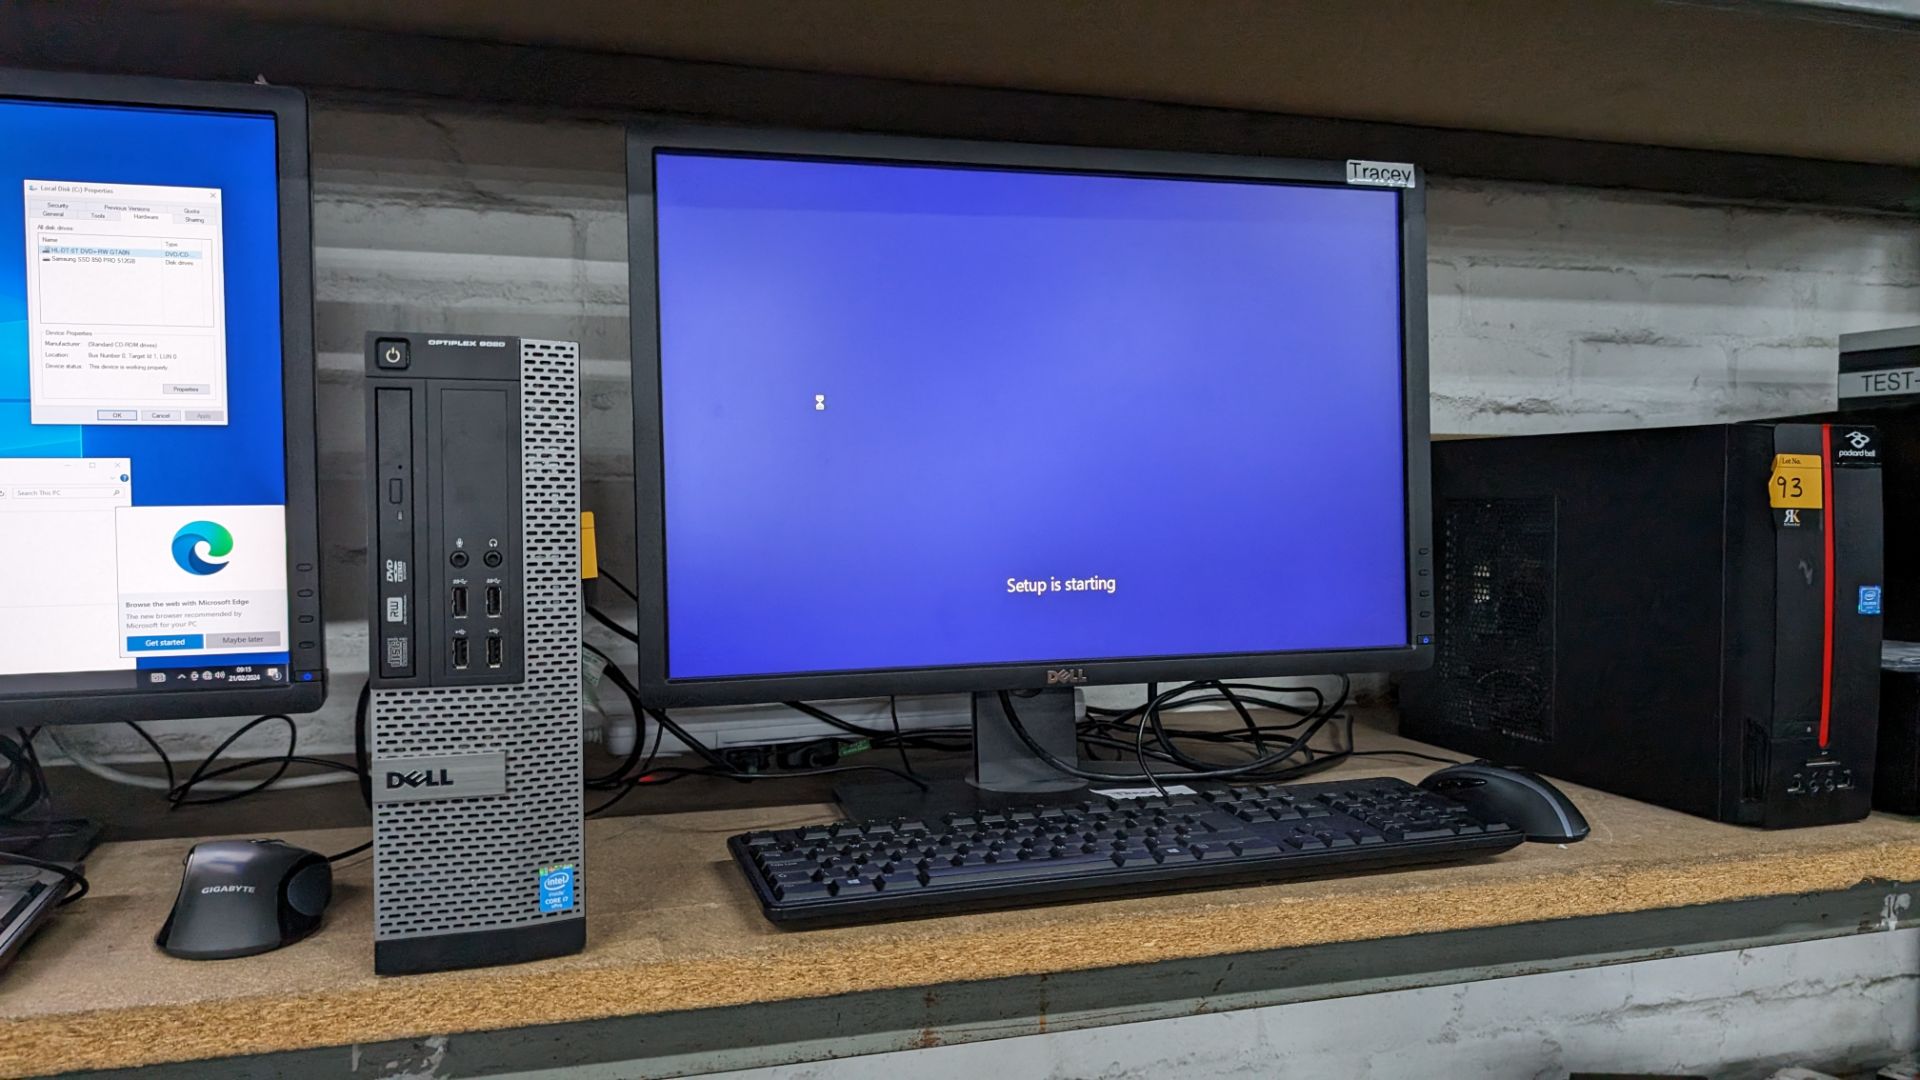 Dell Optiplex 9020 compact tower computer with Intel i7 vPro processor, including widescreen monitor - Image 9 of 18